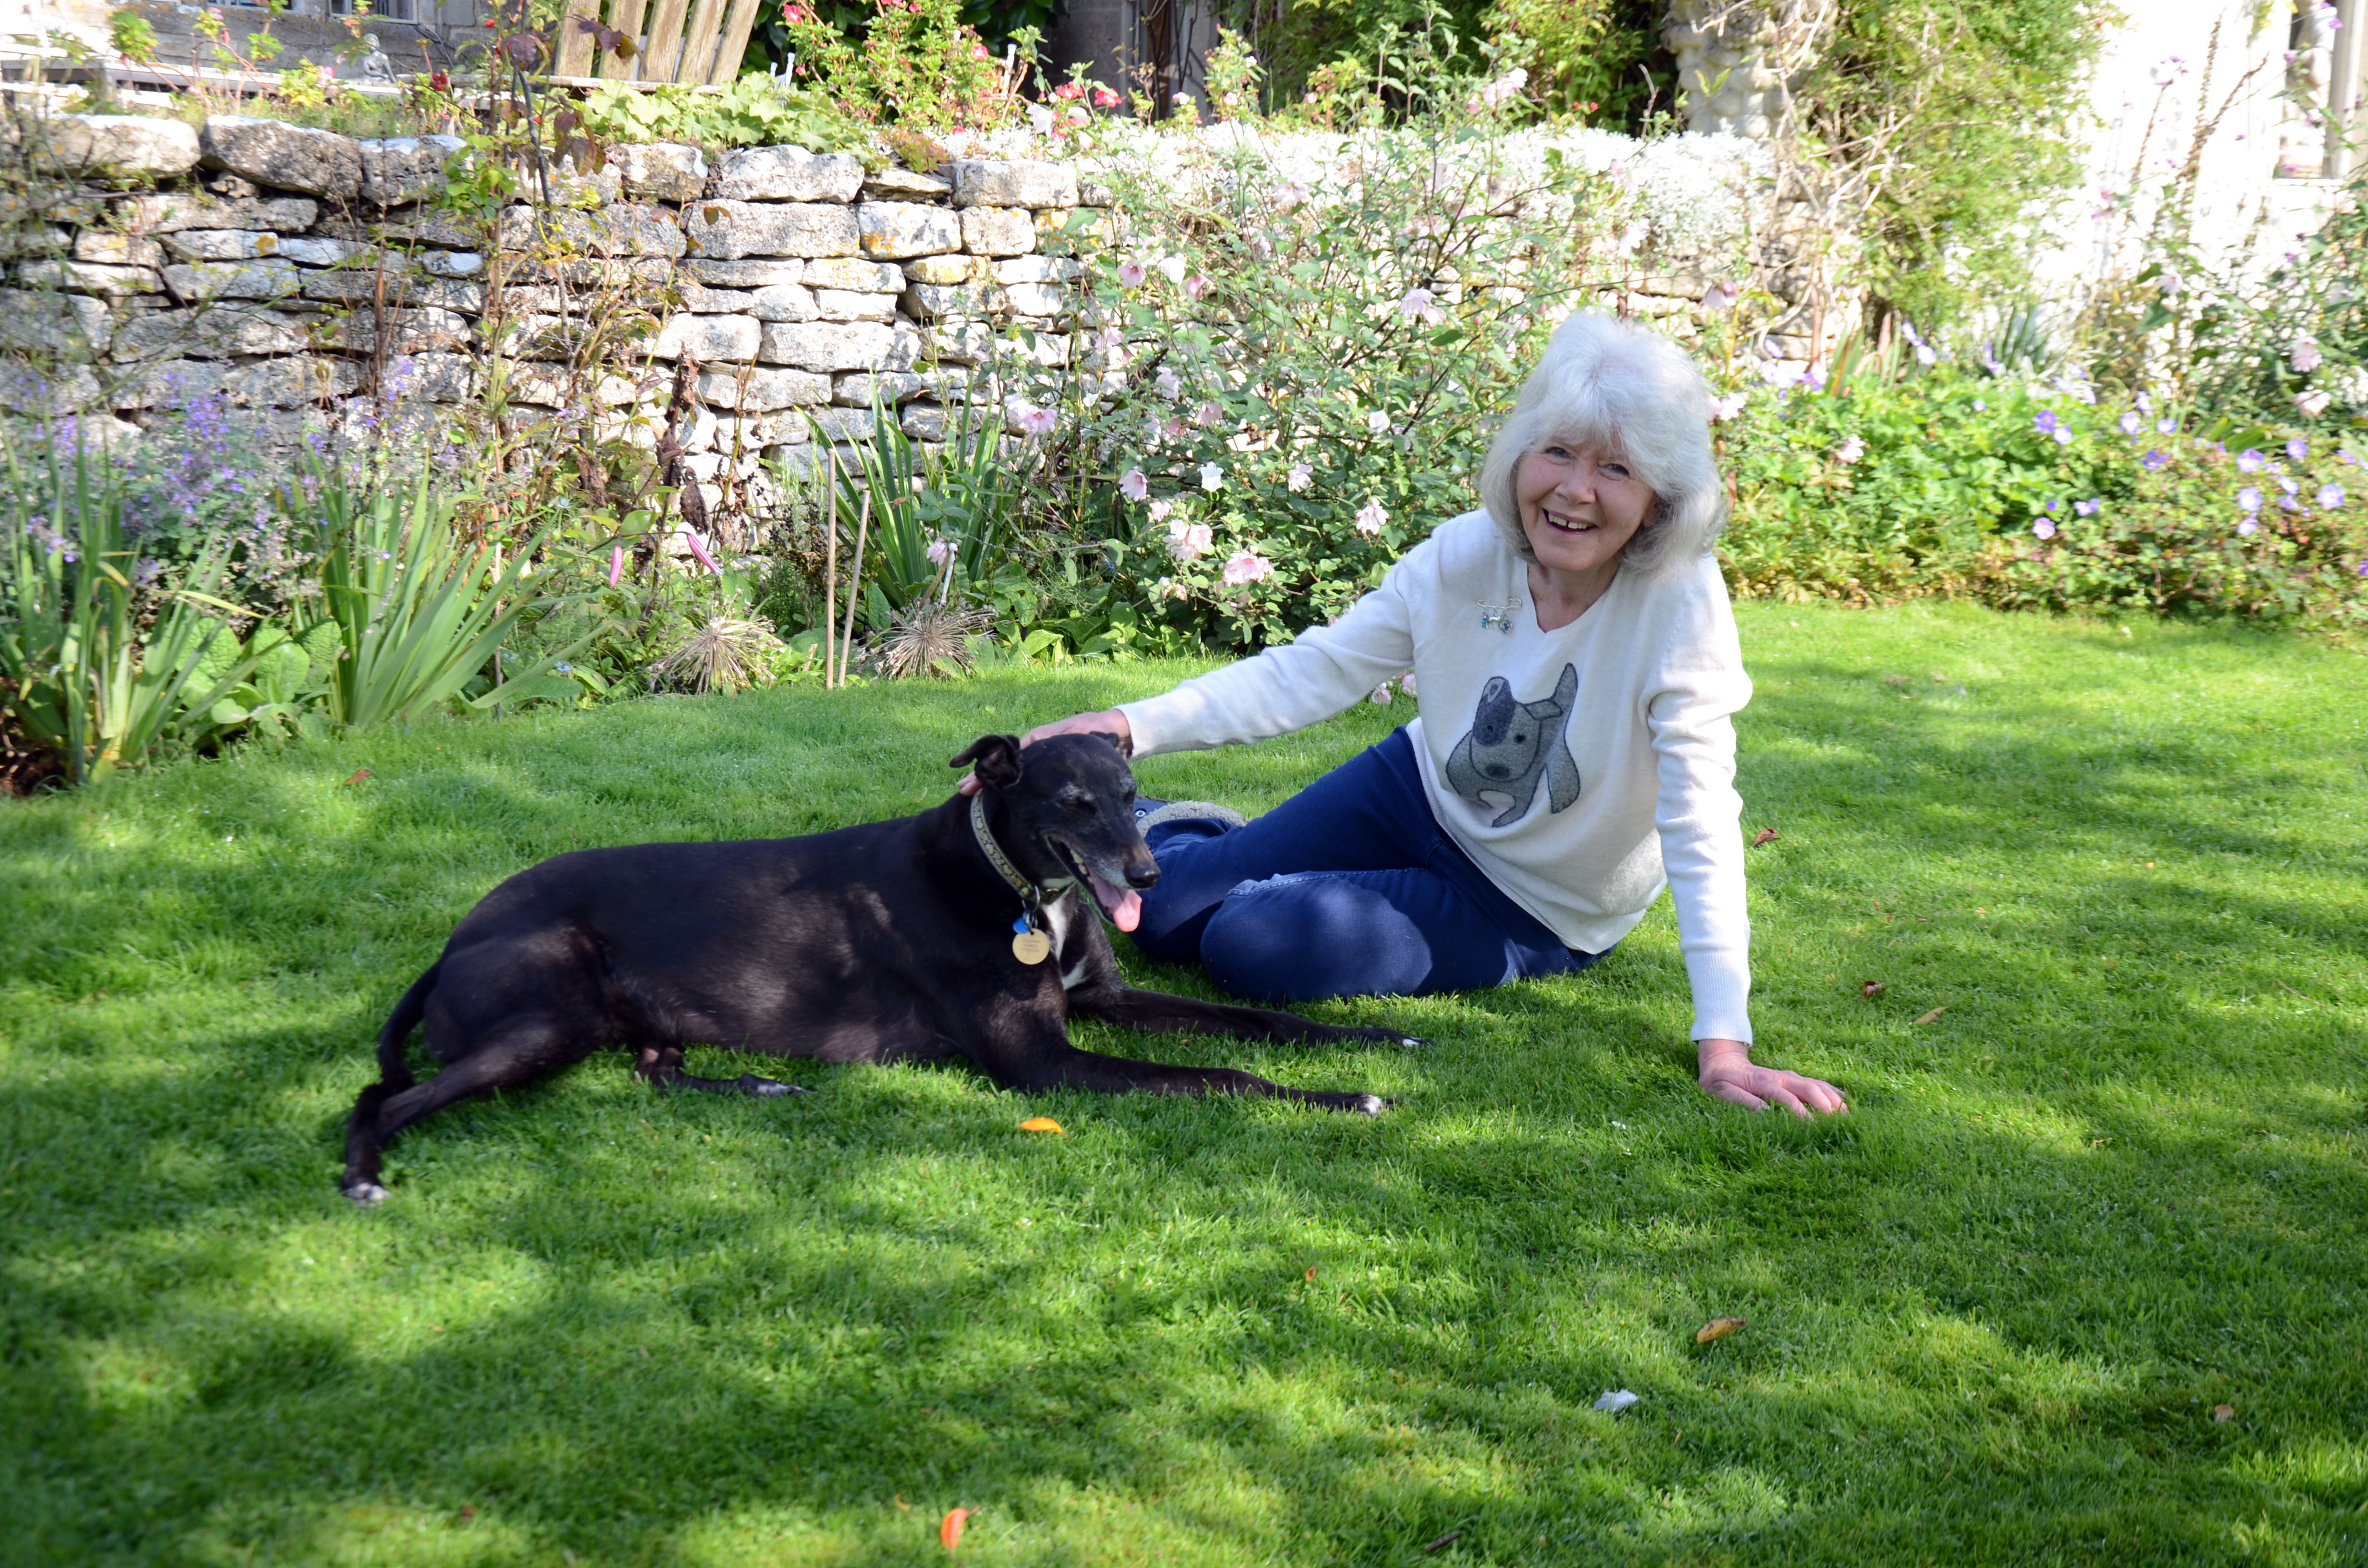 Bluebell and her owner Jilly Cooper sit down on grass in the shade